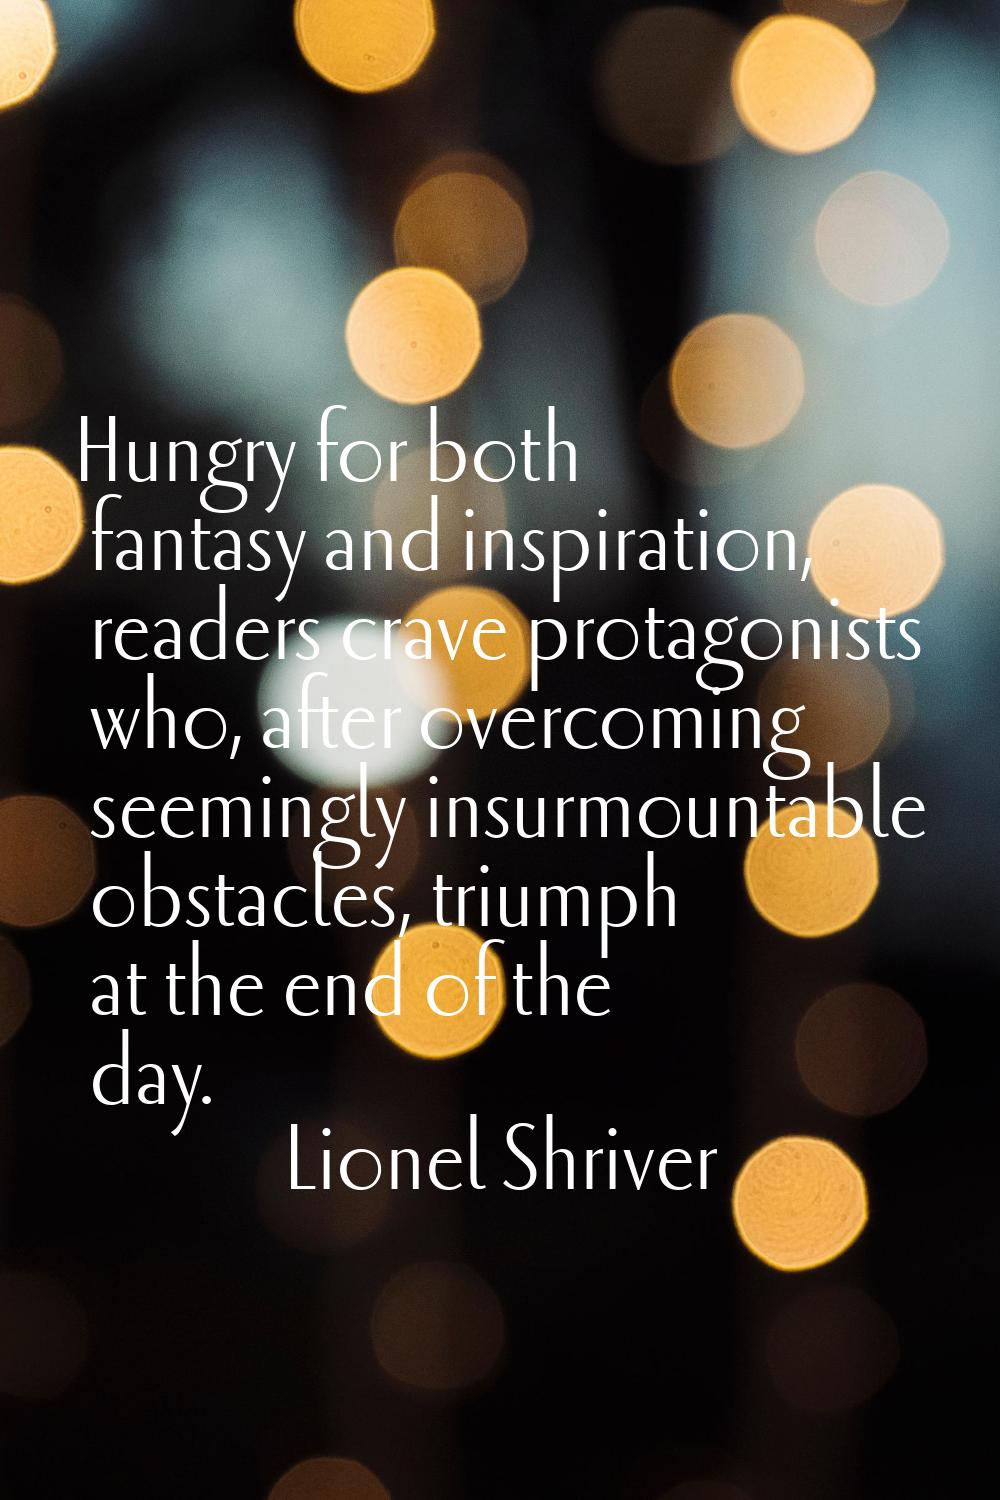 Hungry for both fantasy and inspiration, readers crave protagonists who, after overcoming seemingly